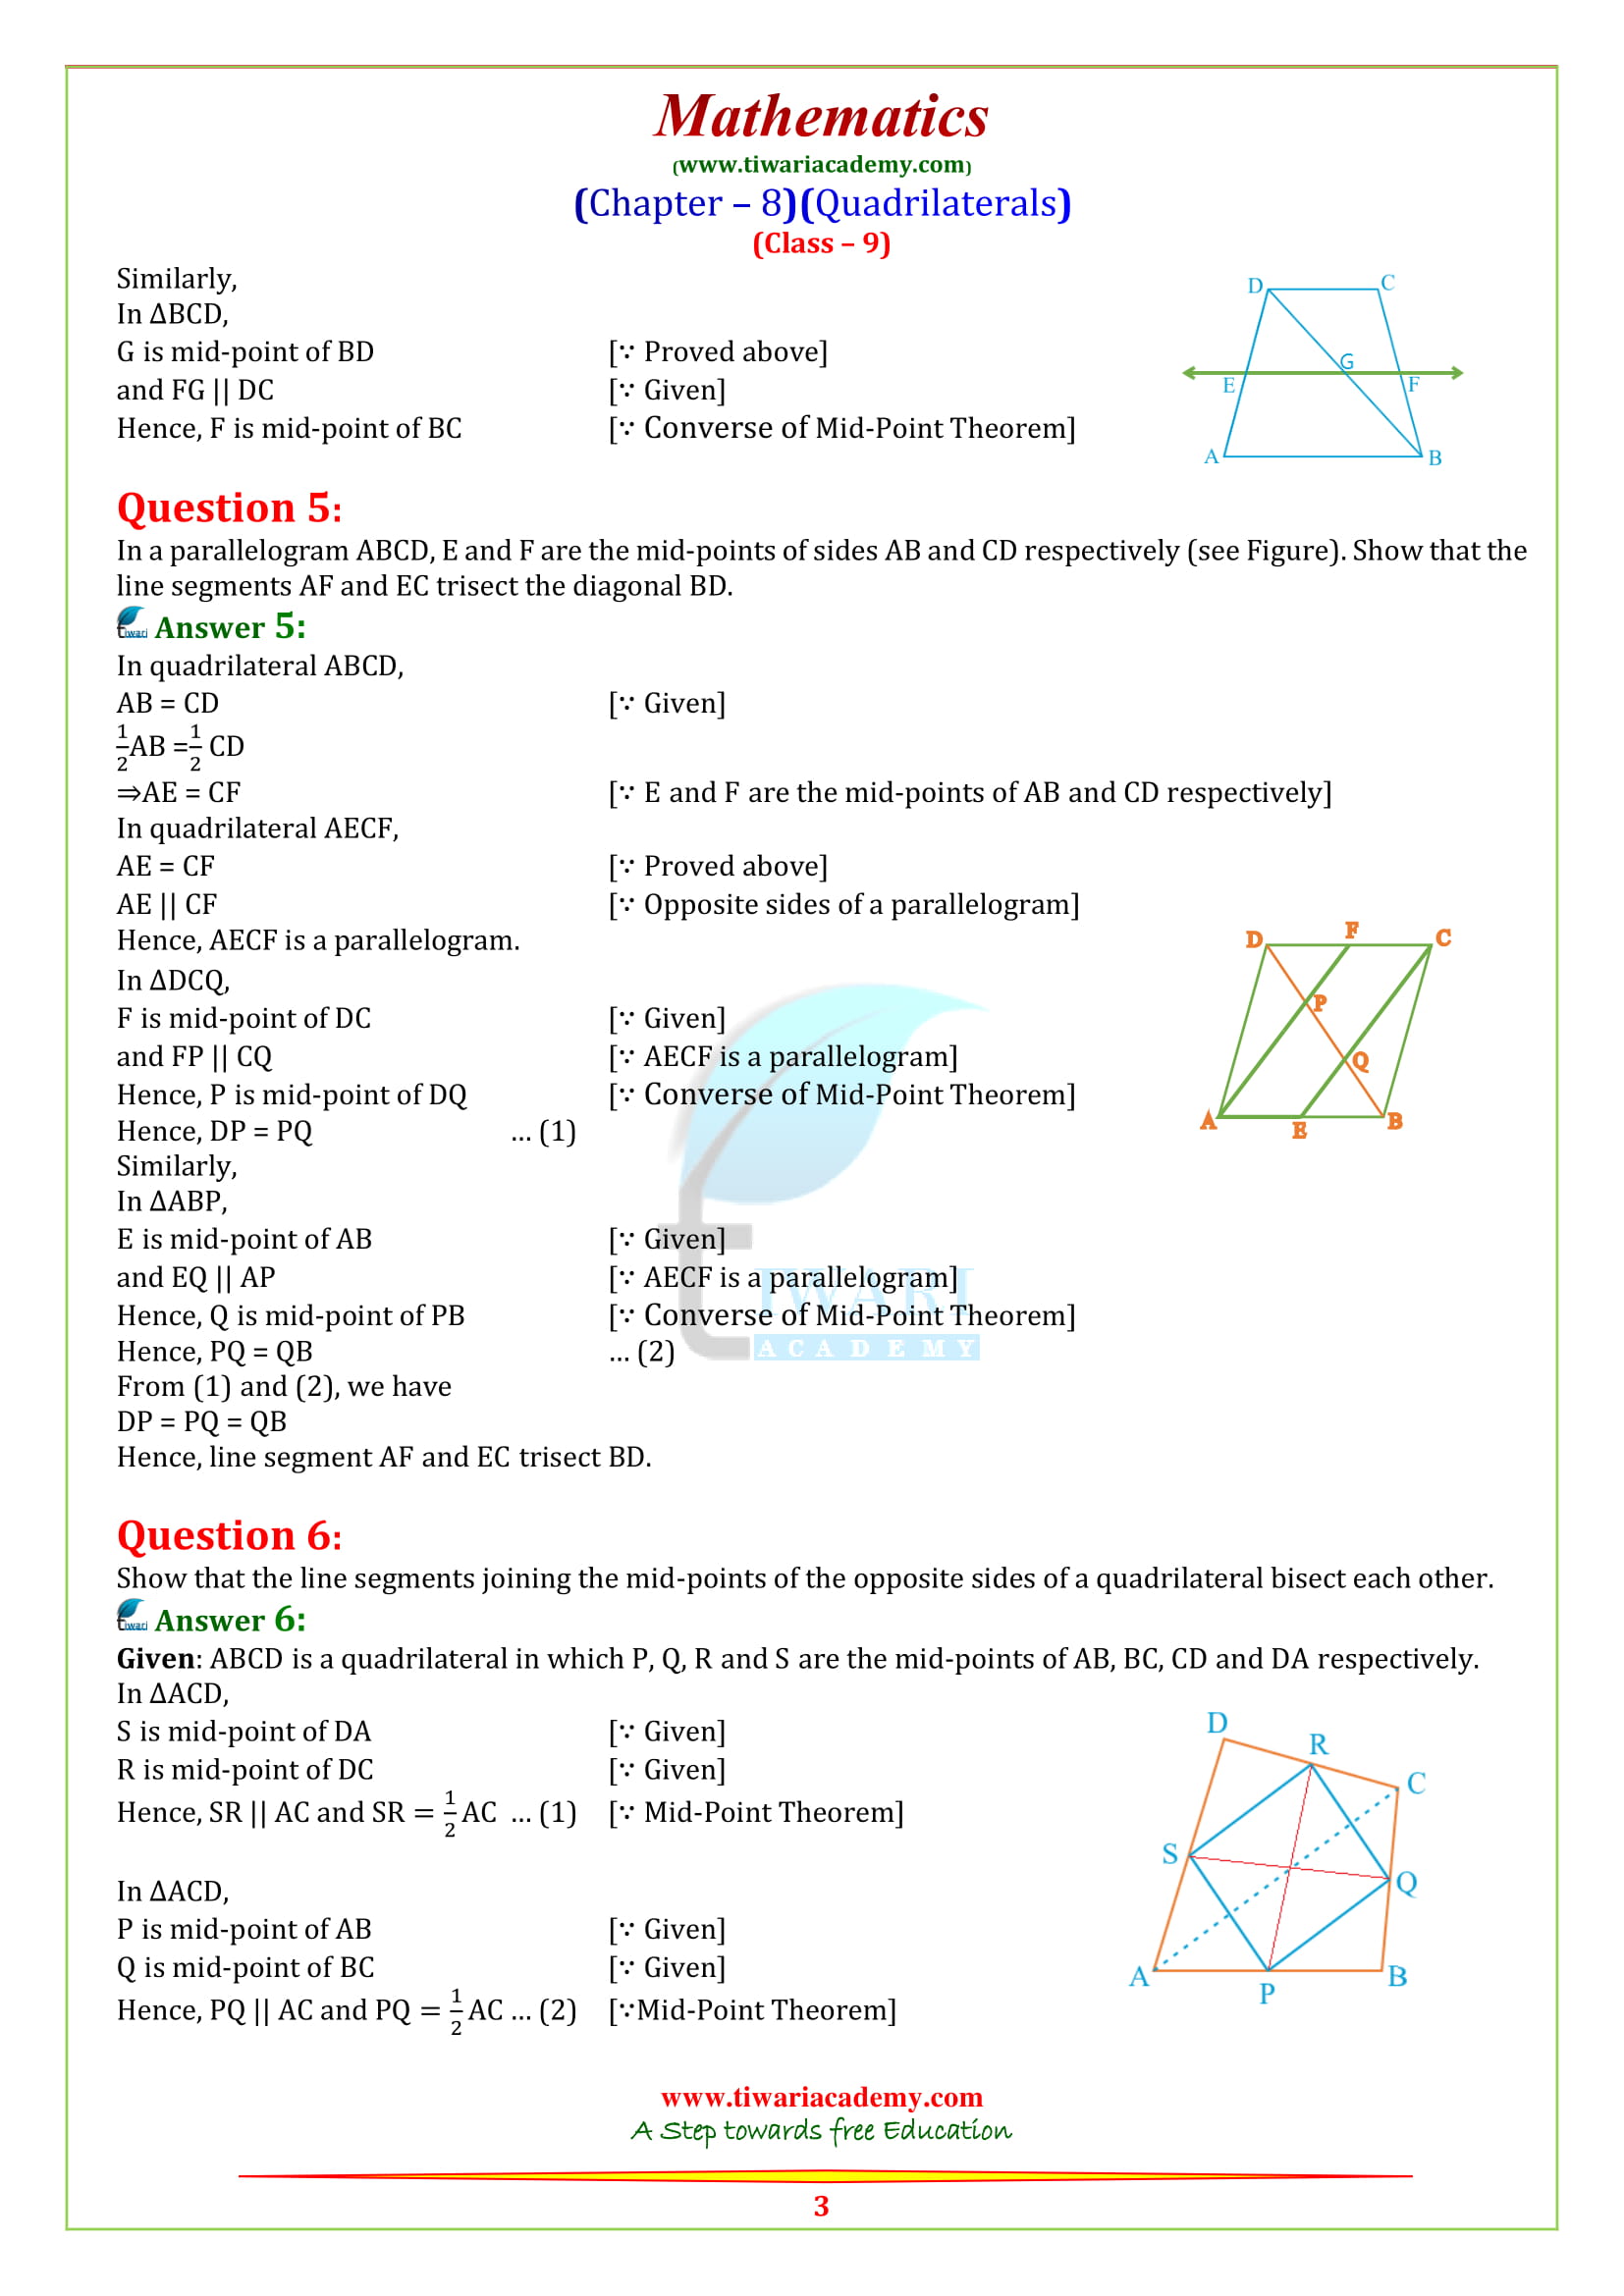 9 Maths Exercise 8.2 solutions updated for UP Board 2018-2019.